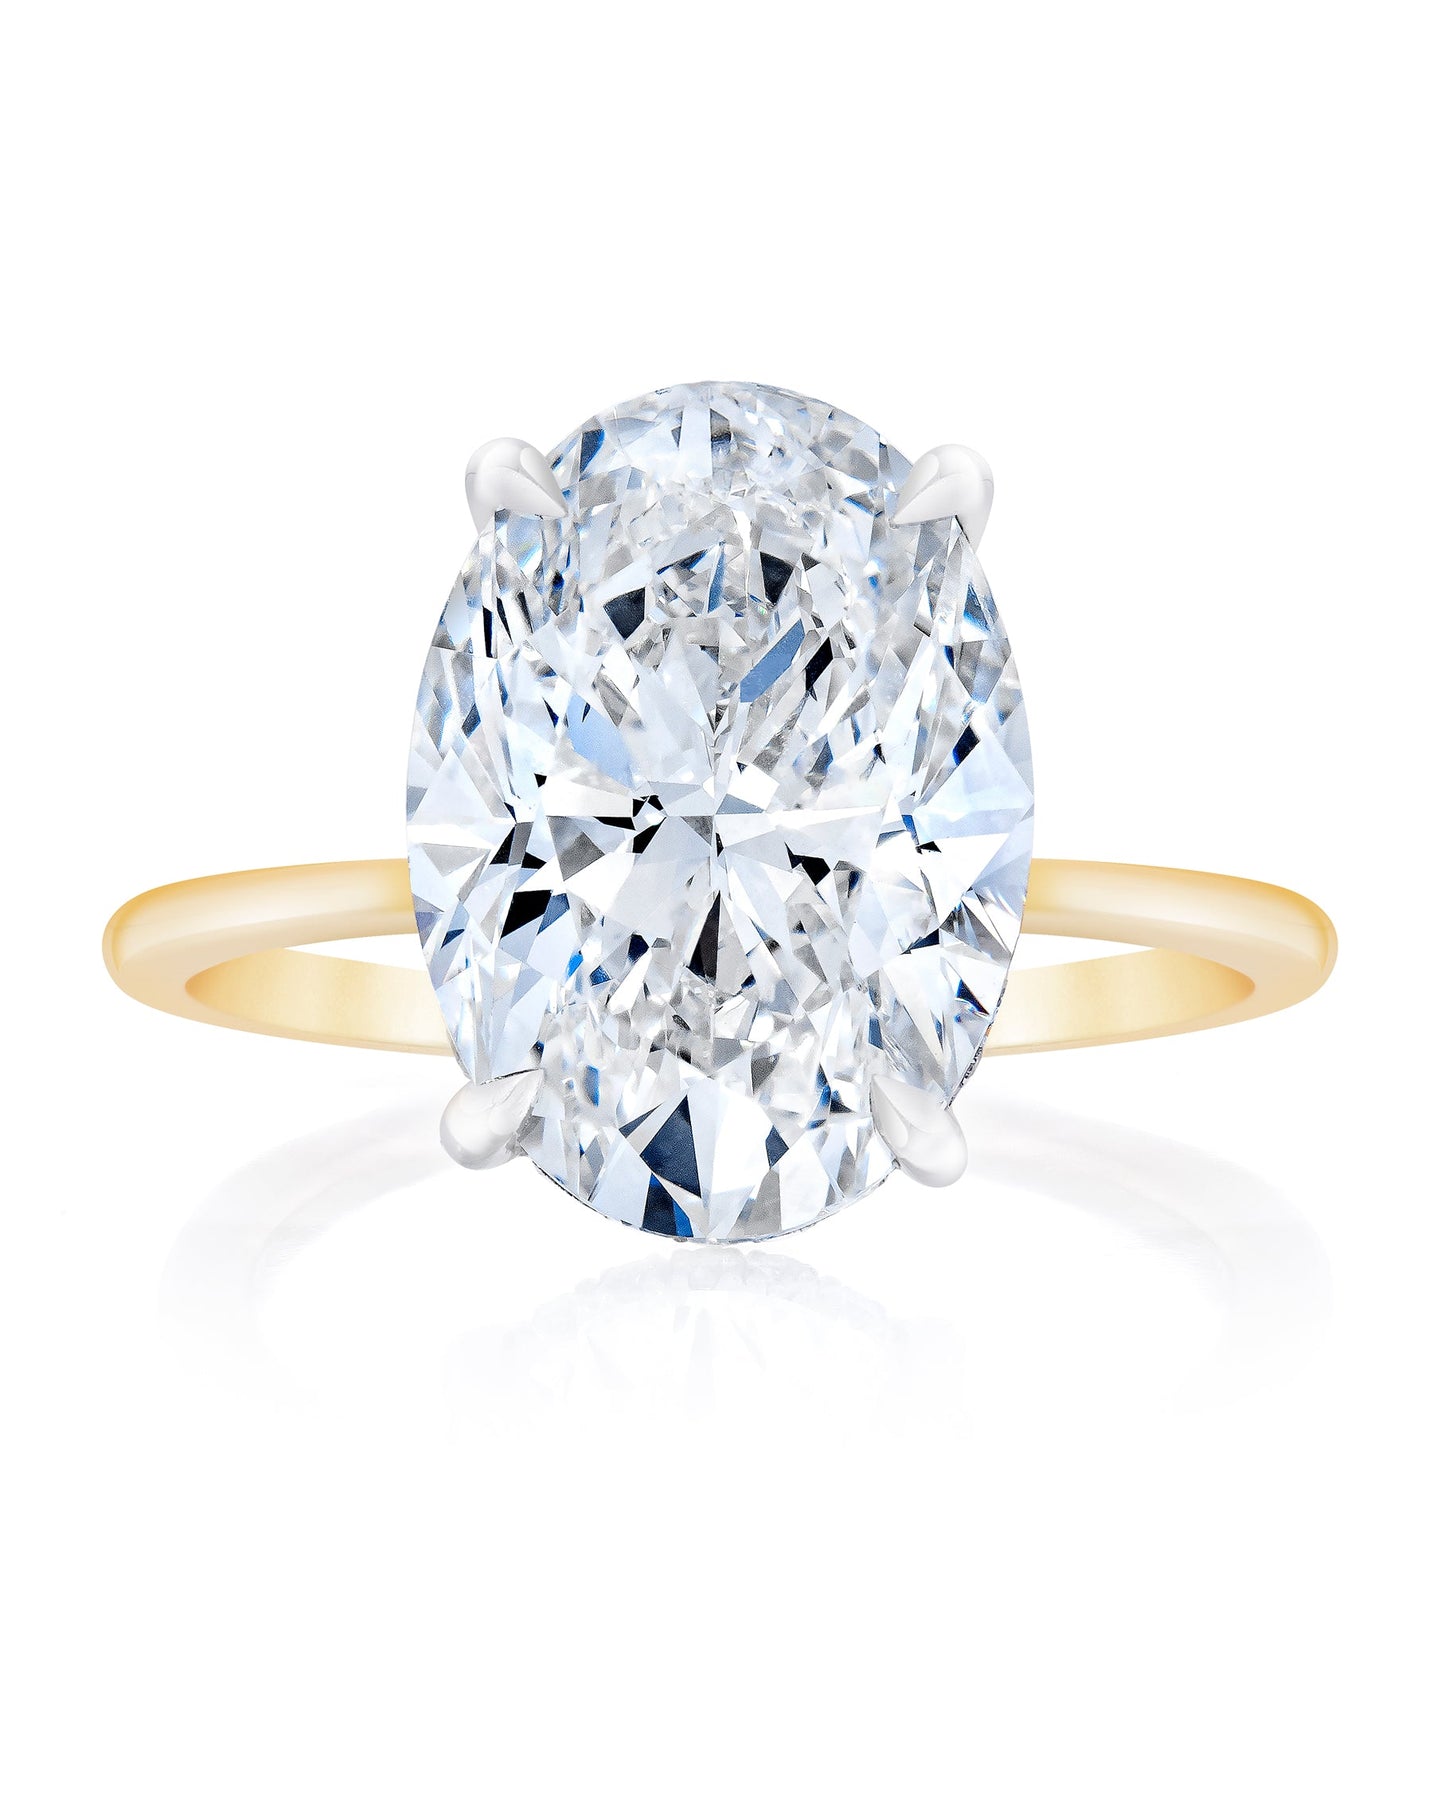 What Your Bespoke Engagement Rings Reveal About You